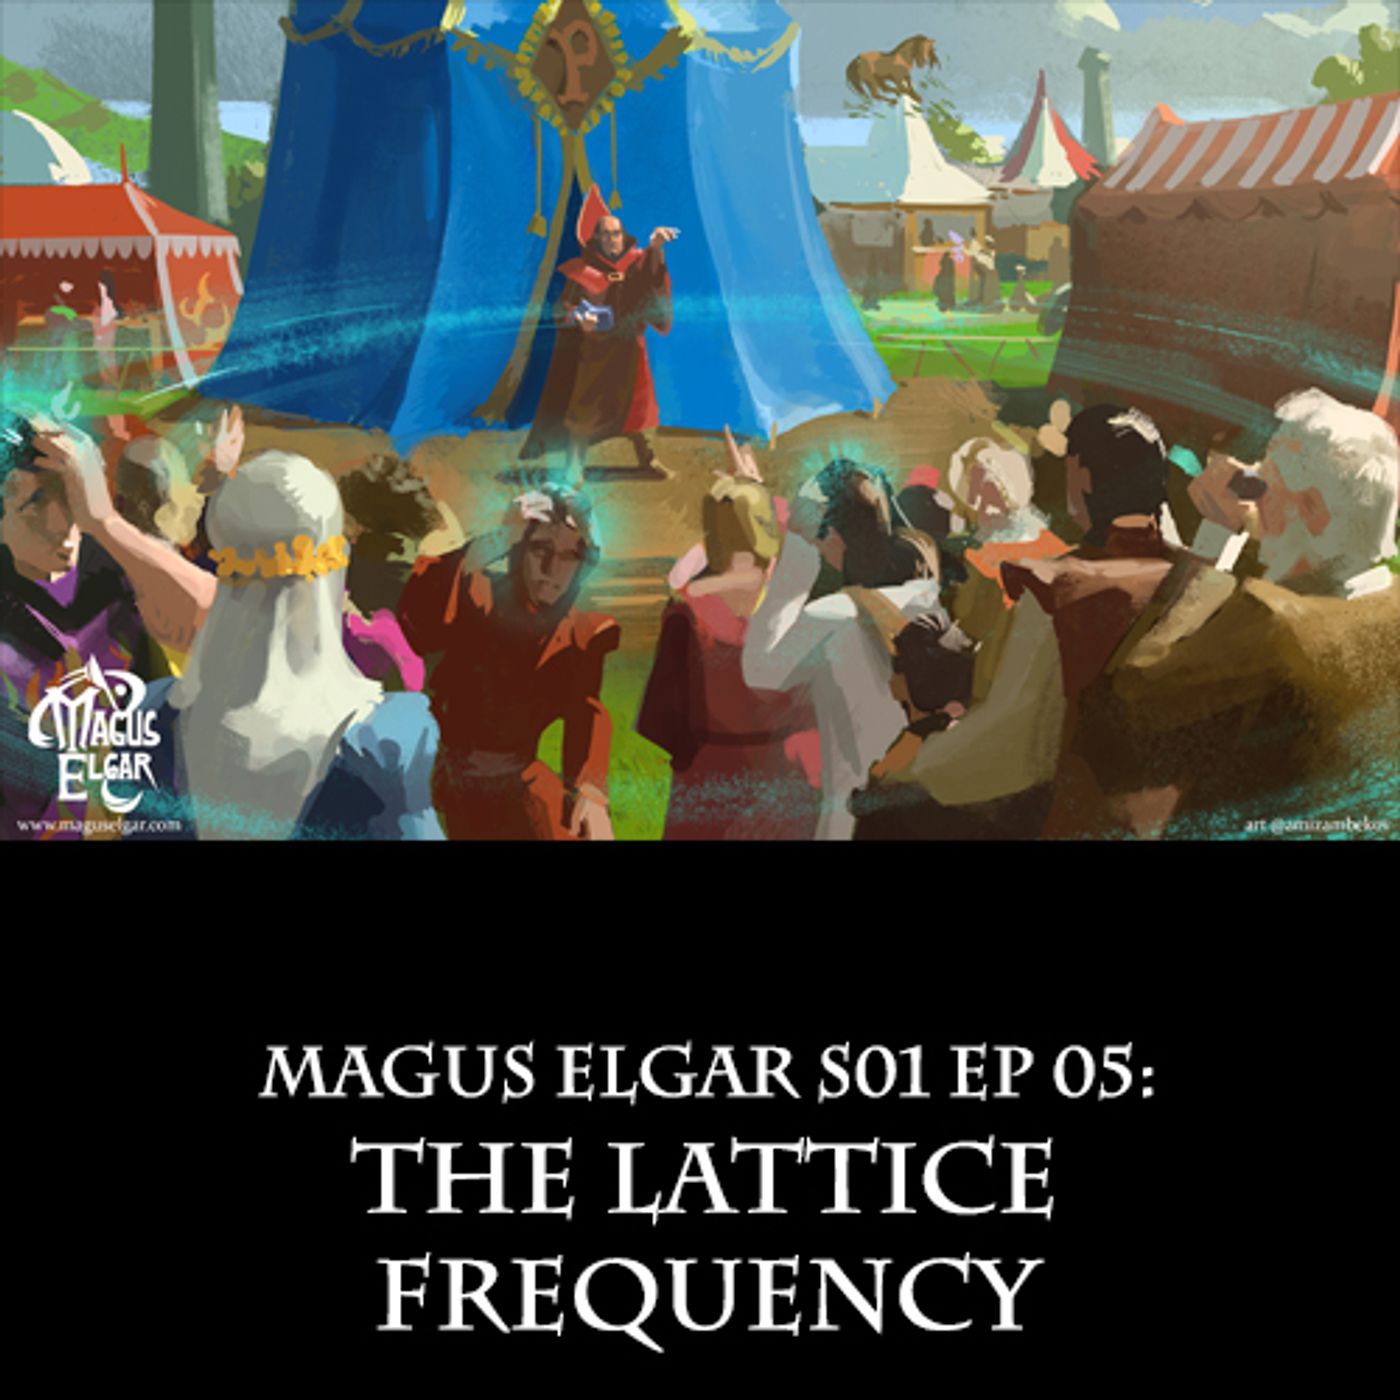 Magus Elgar S01 Ep 05: The Lattice Frequency